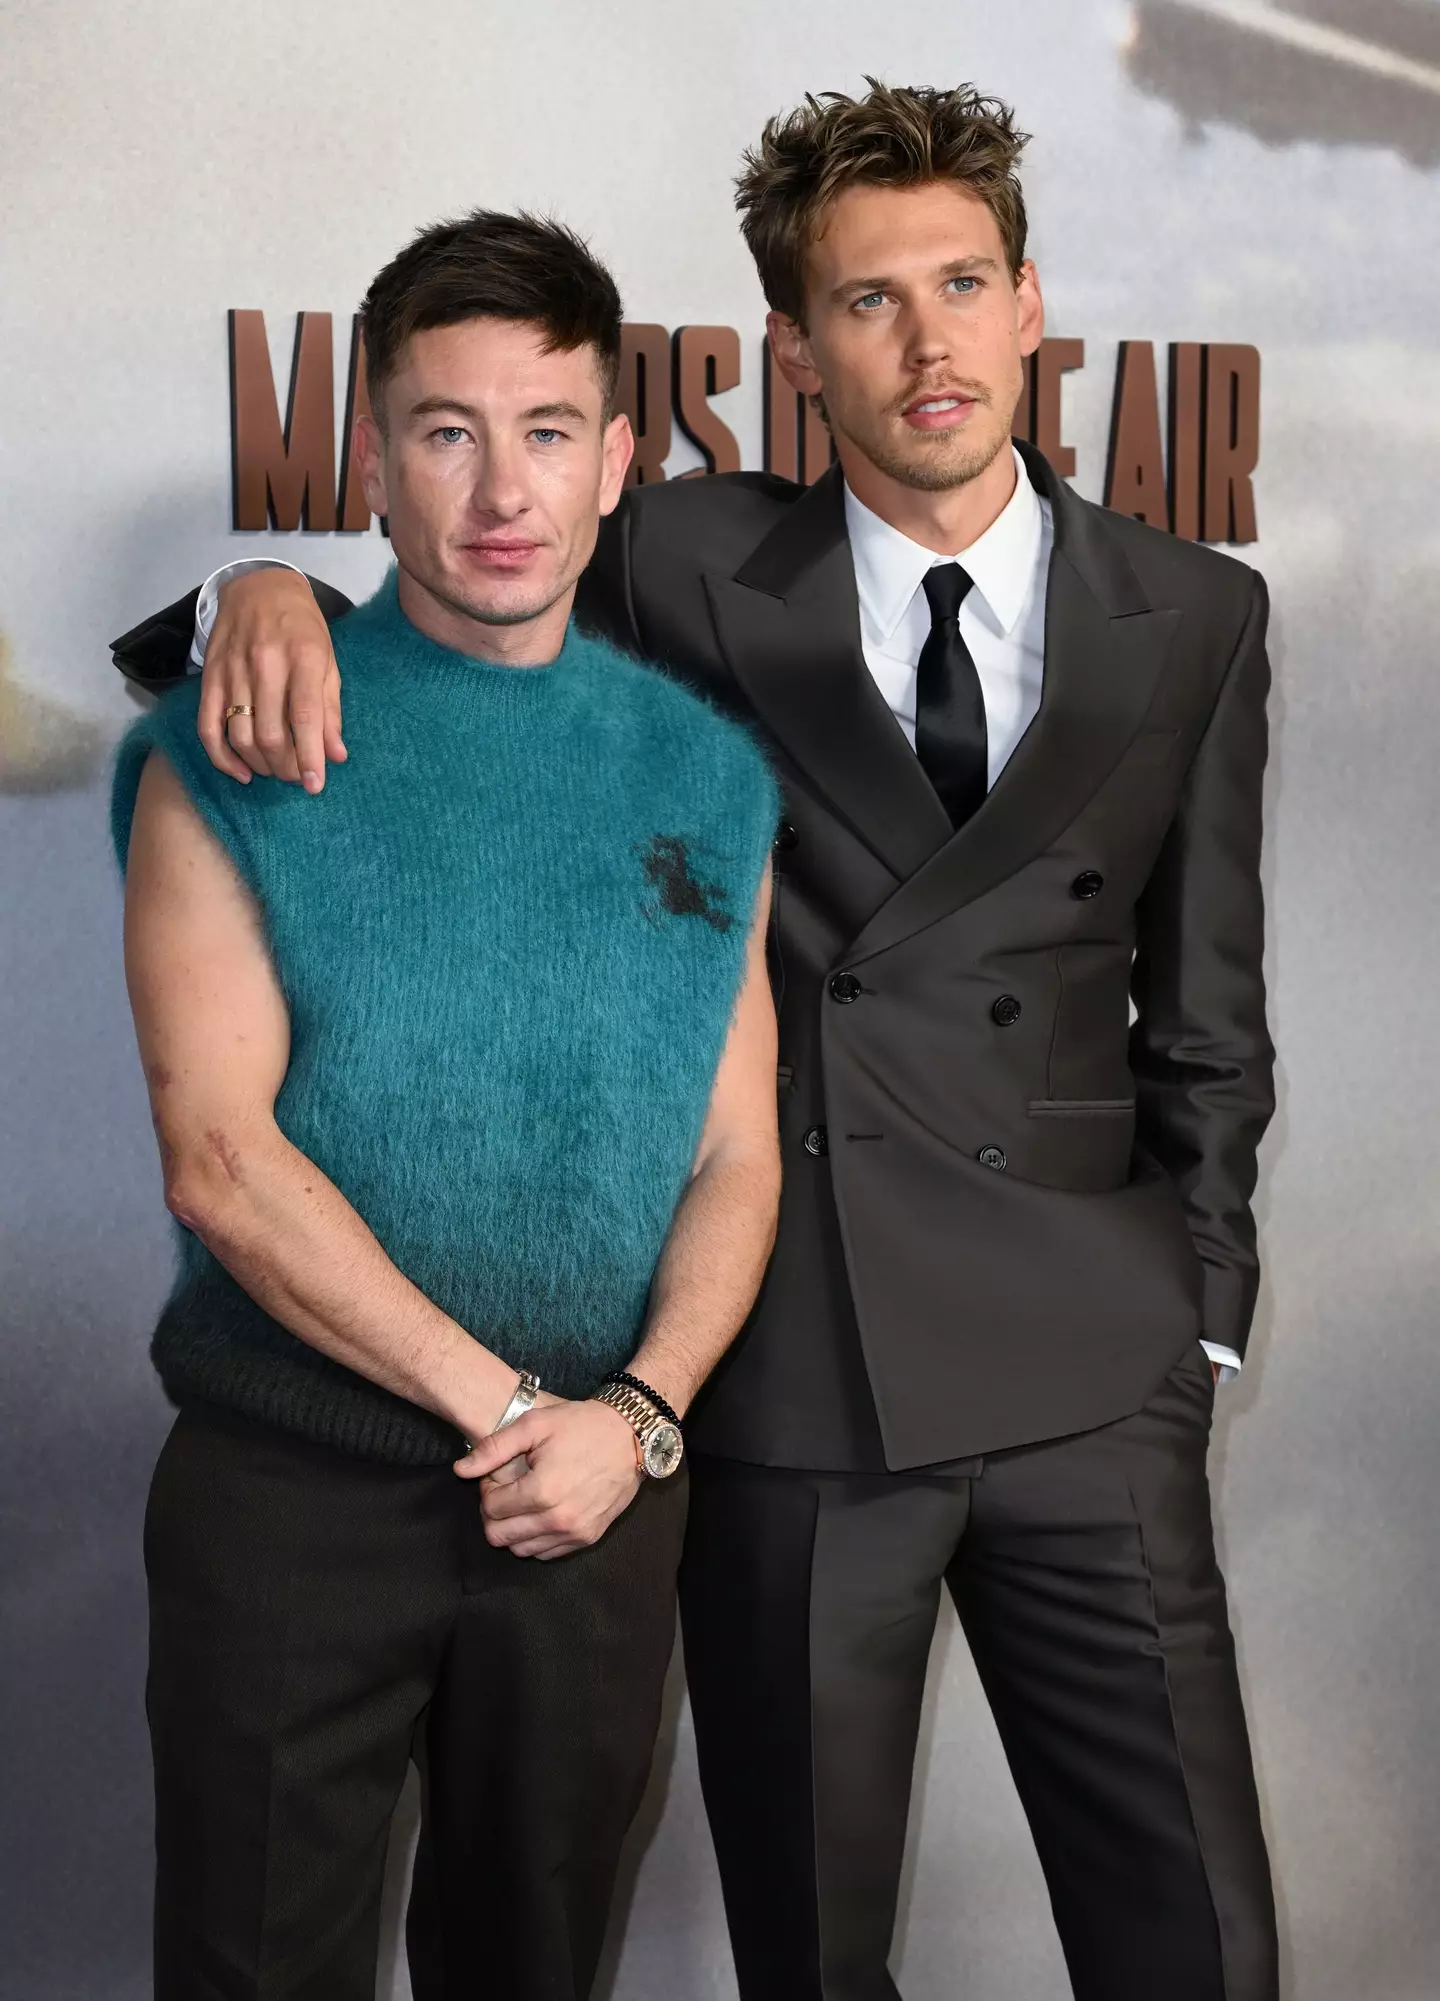 Barry Keoghan and Austin Butler star in the new AppleTV+ series.